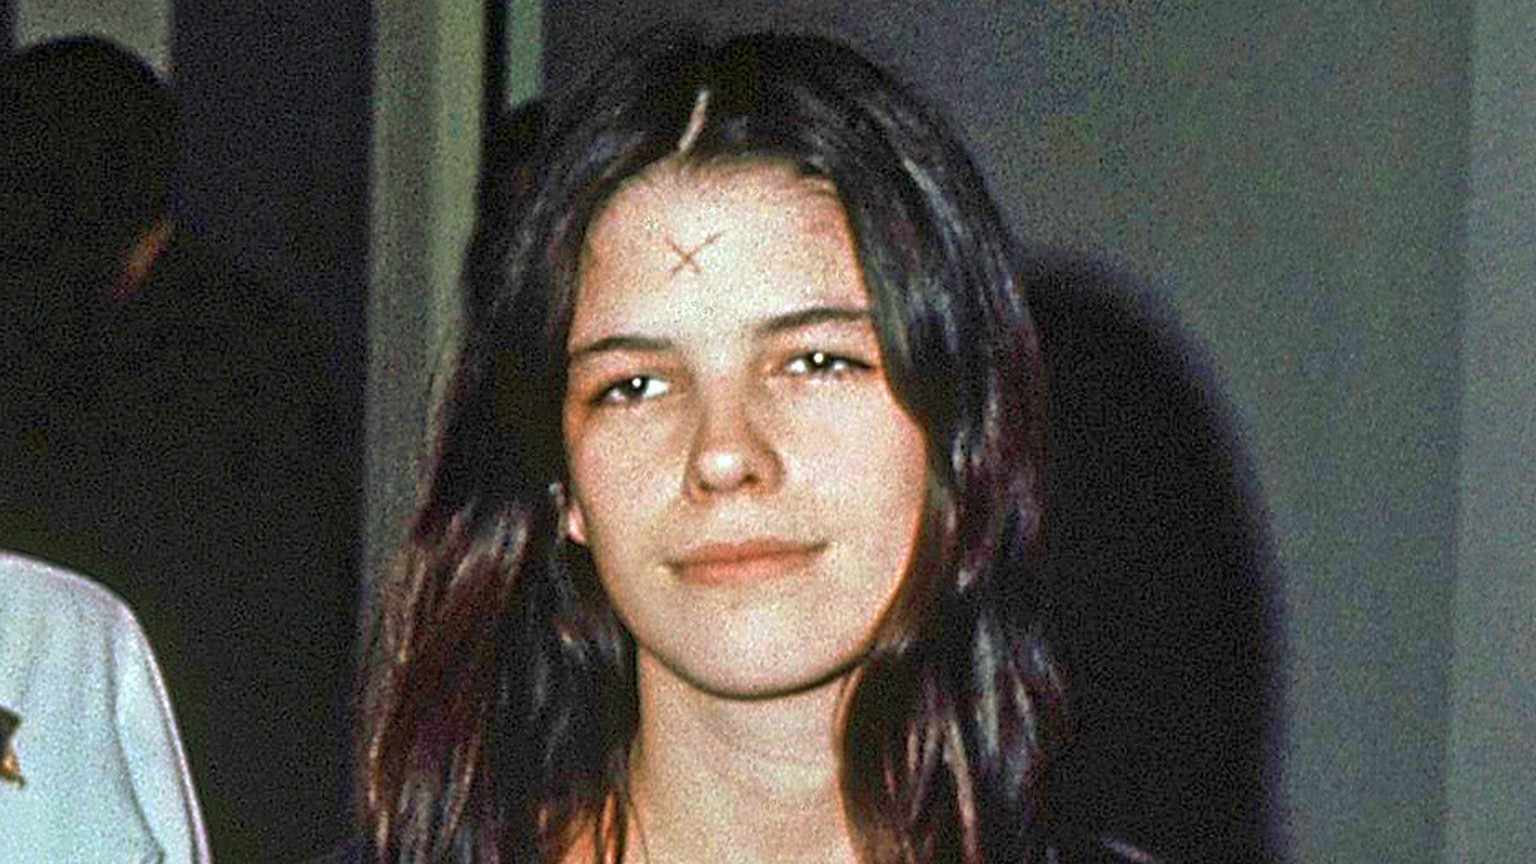 FILE - Leslie Van Houten is shown in a Los Angeles lockup on March 29, 1971. The Charles Manson follower has been released from a California prison after serving 53 years for two infamous murders. The ...